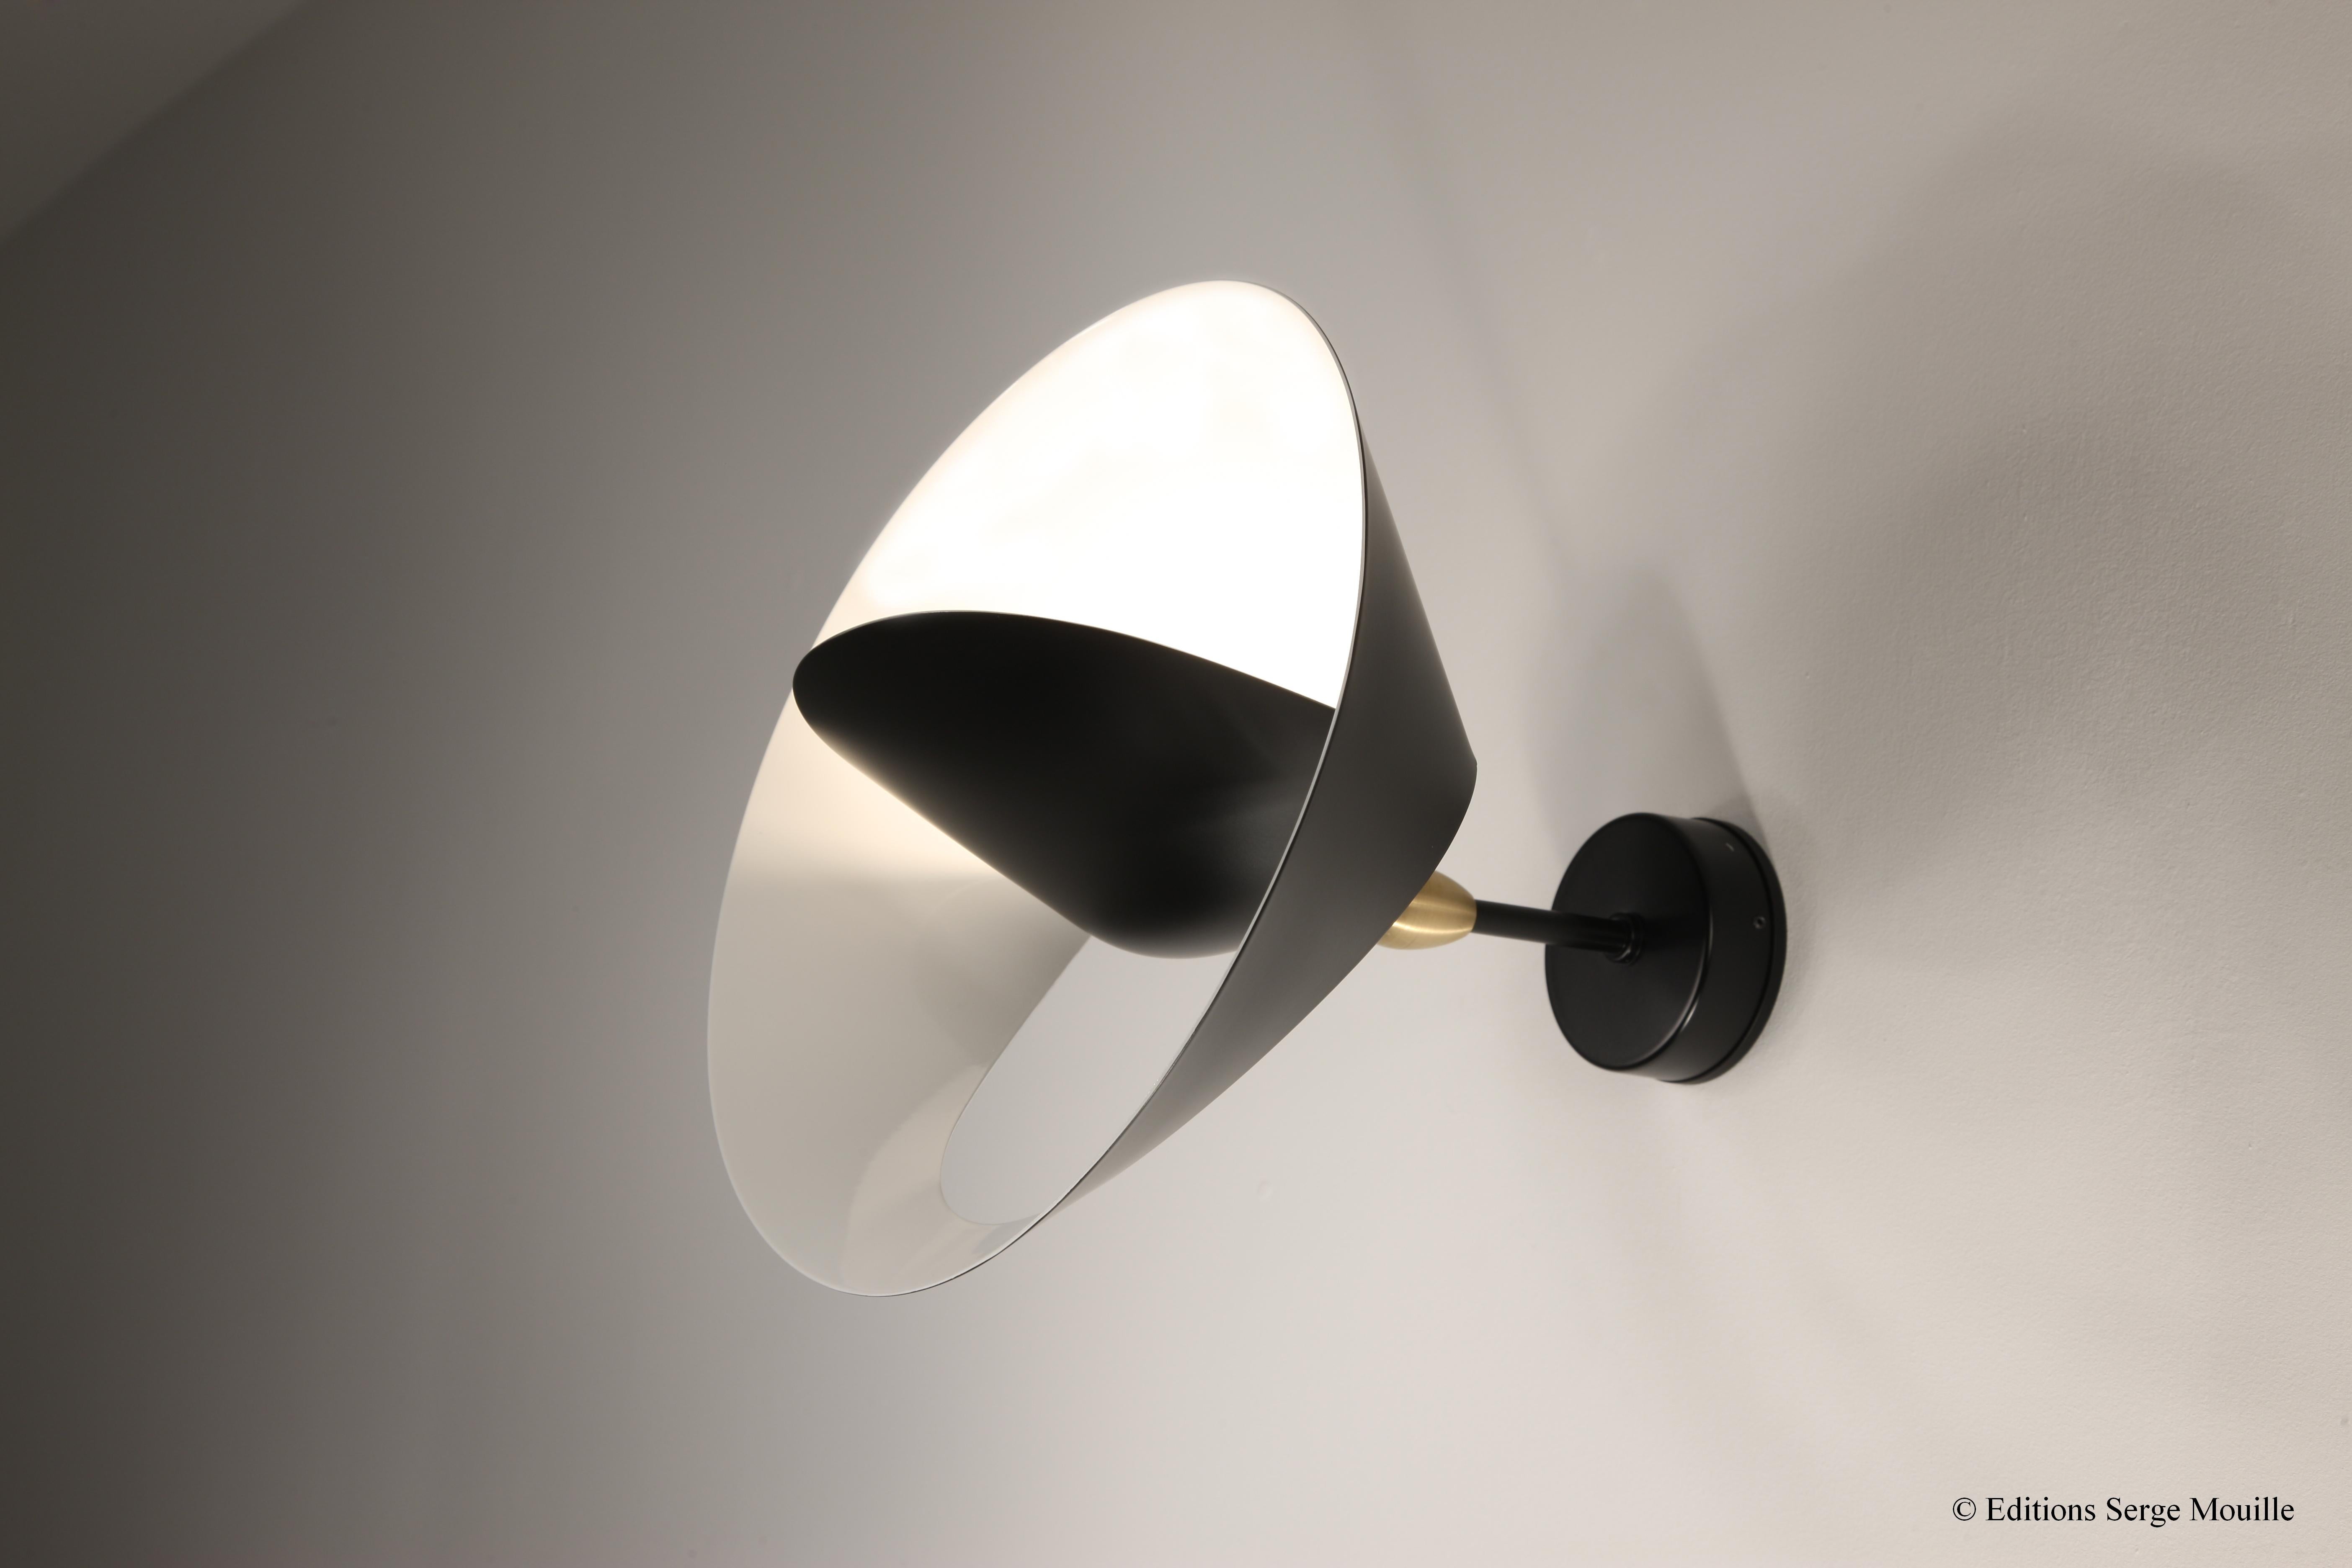 Sconce Saturne by Serge Mouille
Dimensions: D 30 x H 26 cm
Materials: Brass, steel, aluminium
One of a King. Numbered.
Also available in different colour.

All our lamps can be wired according to each country. If sold to the USA it will be